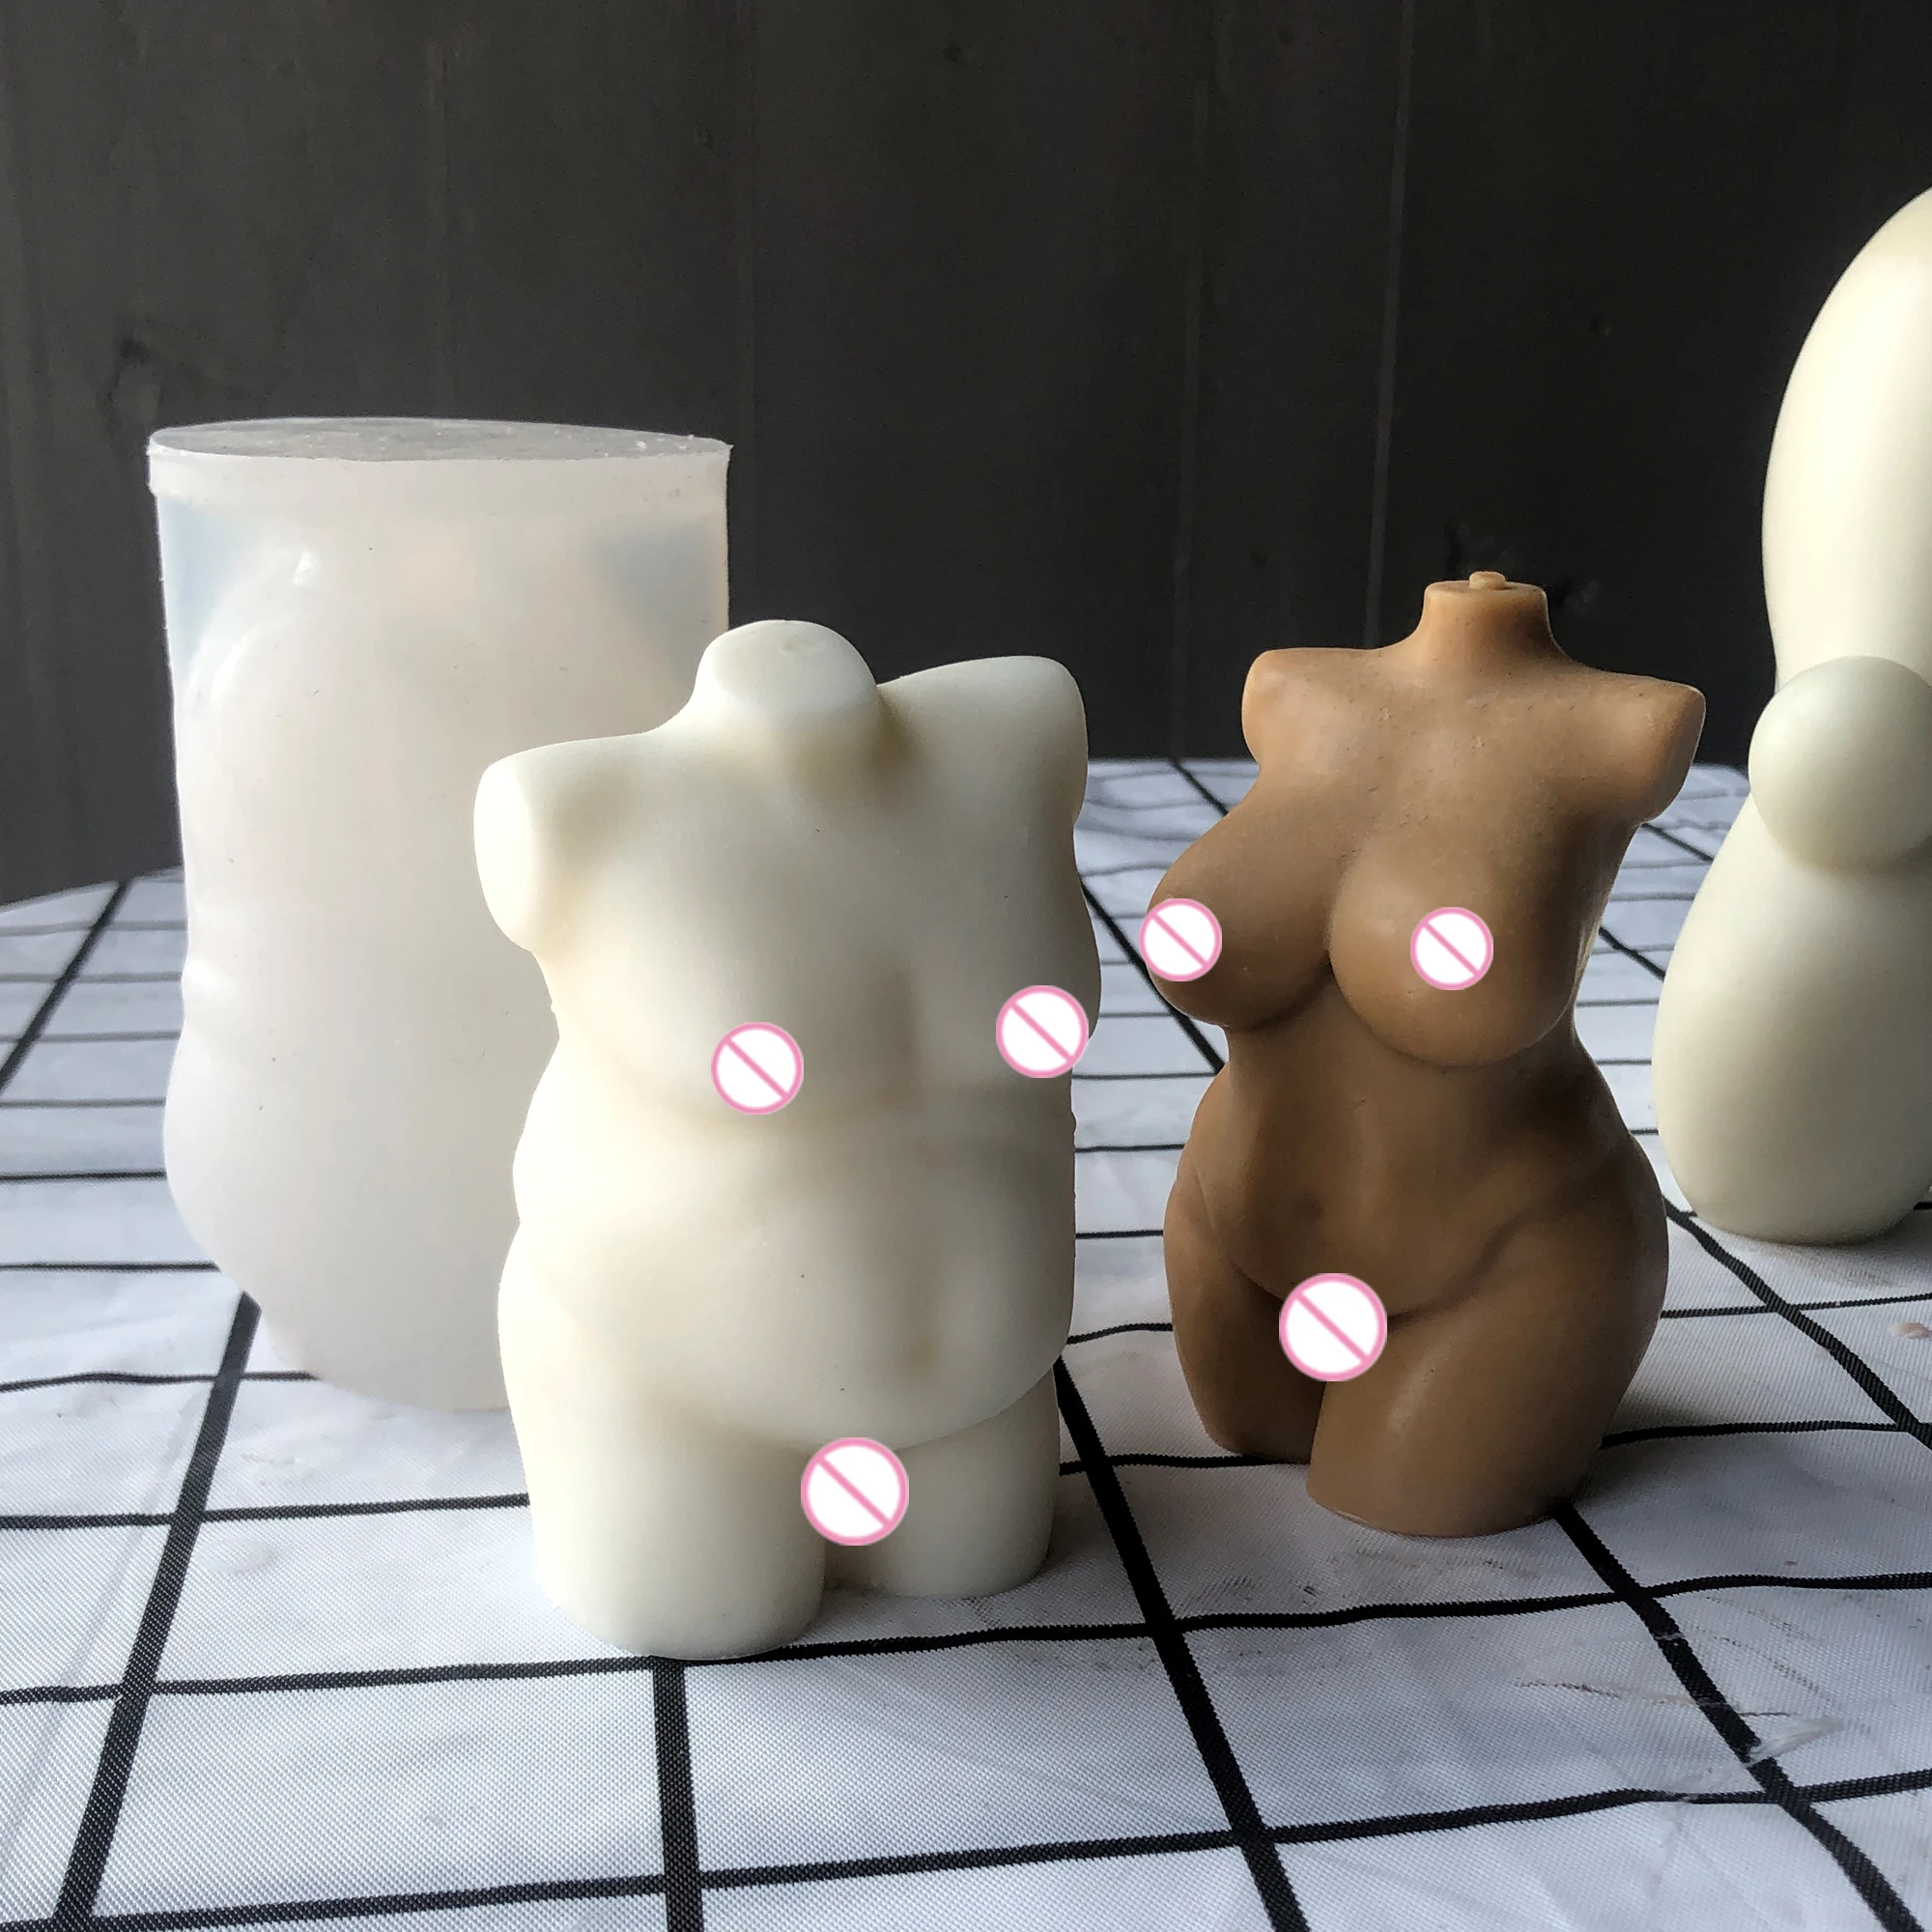 

NEW Design 3D Woman And Man Torso Silicone Mold Naked Nude Fat Female Male Figure Curvy Body Candle Mould, White